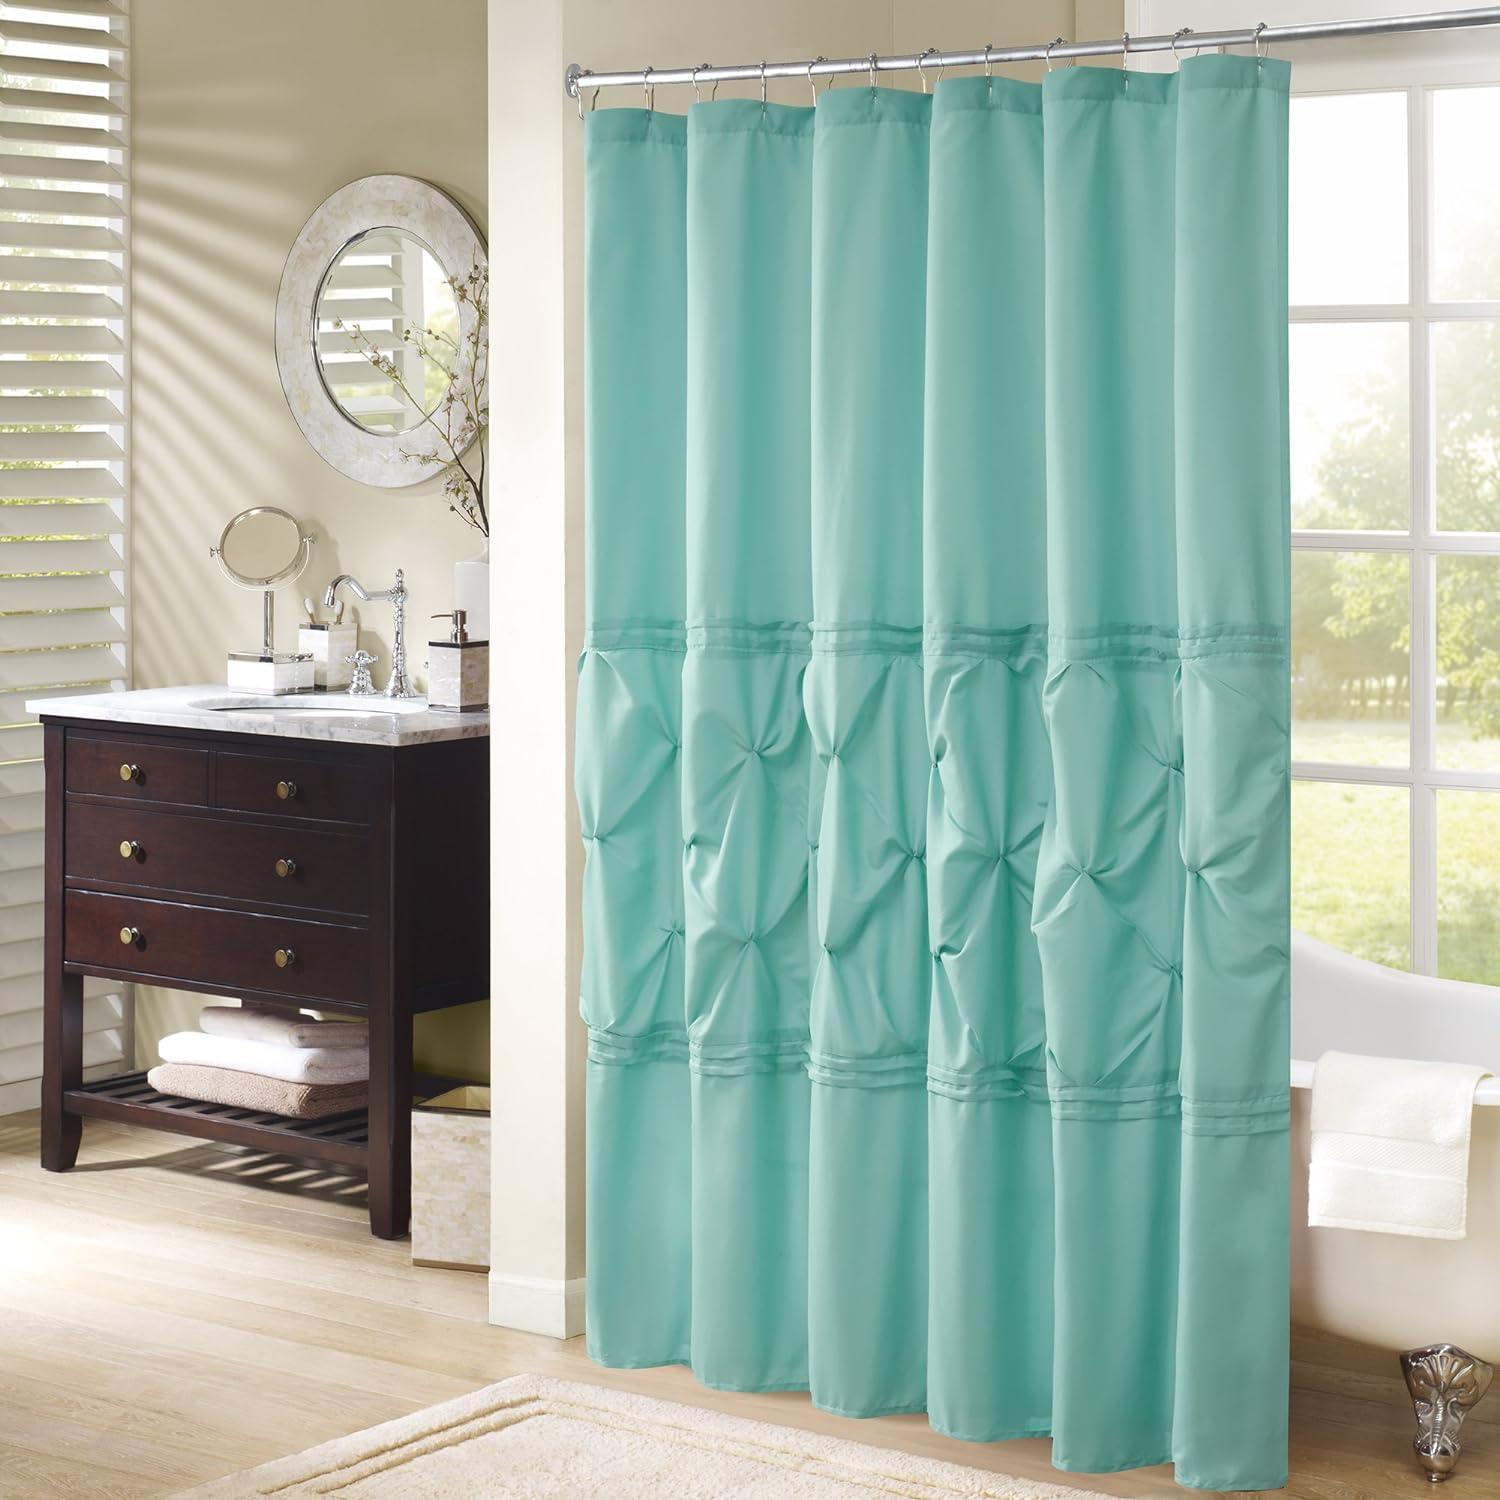 This shower curtain is beautiful. It is well made (straight stitching, no loose threads). The curtain has the navy outside fabric, which is so very soft, I can't stop touching it. It has an attached, white, thin inside liner. I am not sure if the inside liner is water proof, so I used a separate waterproof fabric shower liner. I really love the texture/design in the curtain created by the ruching and decorative folded seams. It is not transparent or sheer, only the attached liner is sheer.